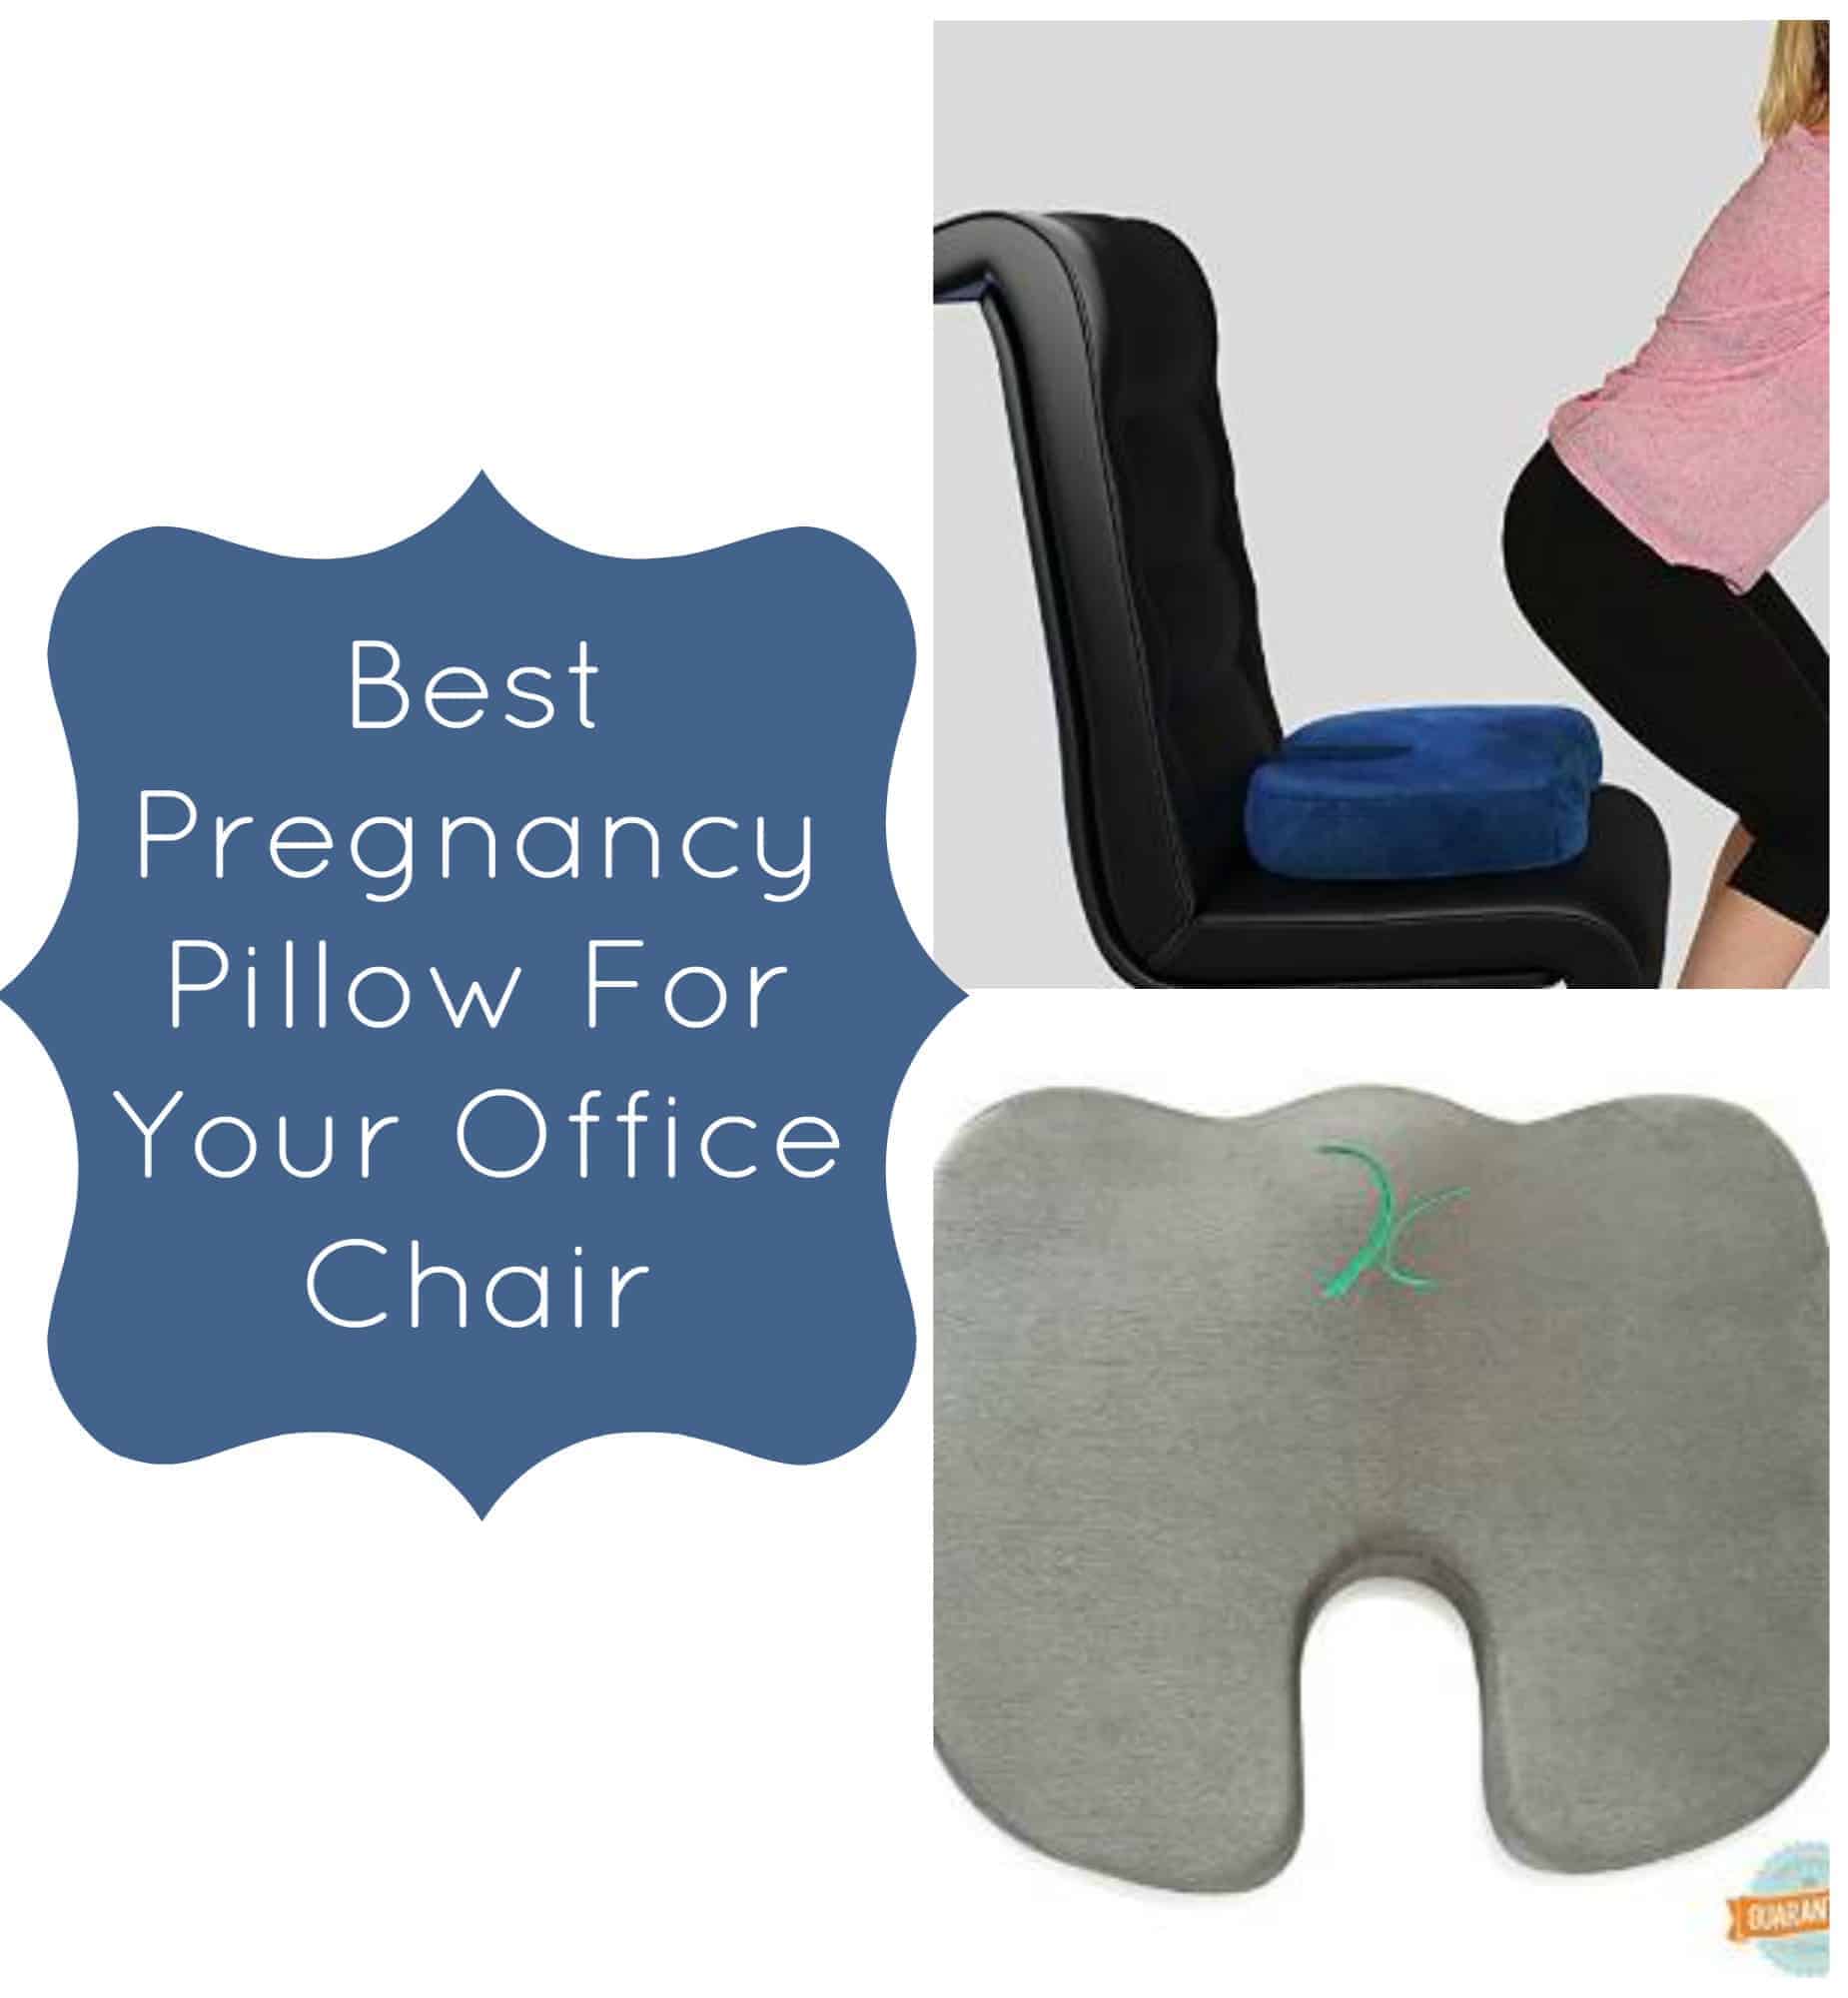 Best Pregnancy Pillow For Your Office Chair In Jan 2021 Ourfamilyworld Com